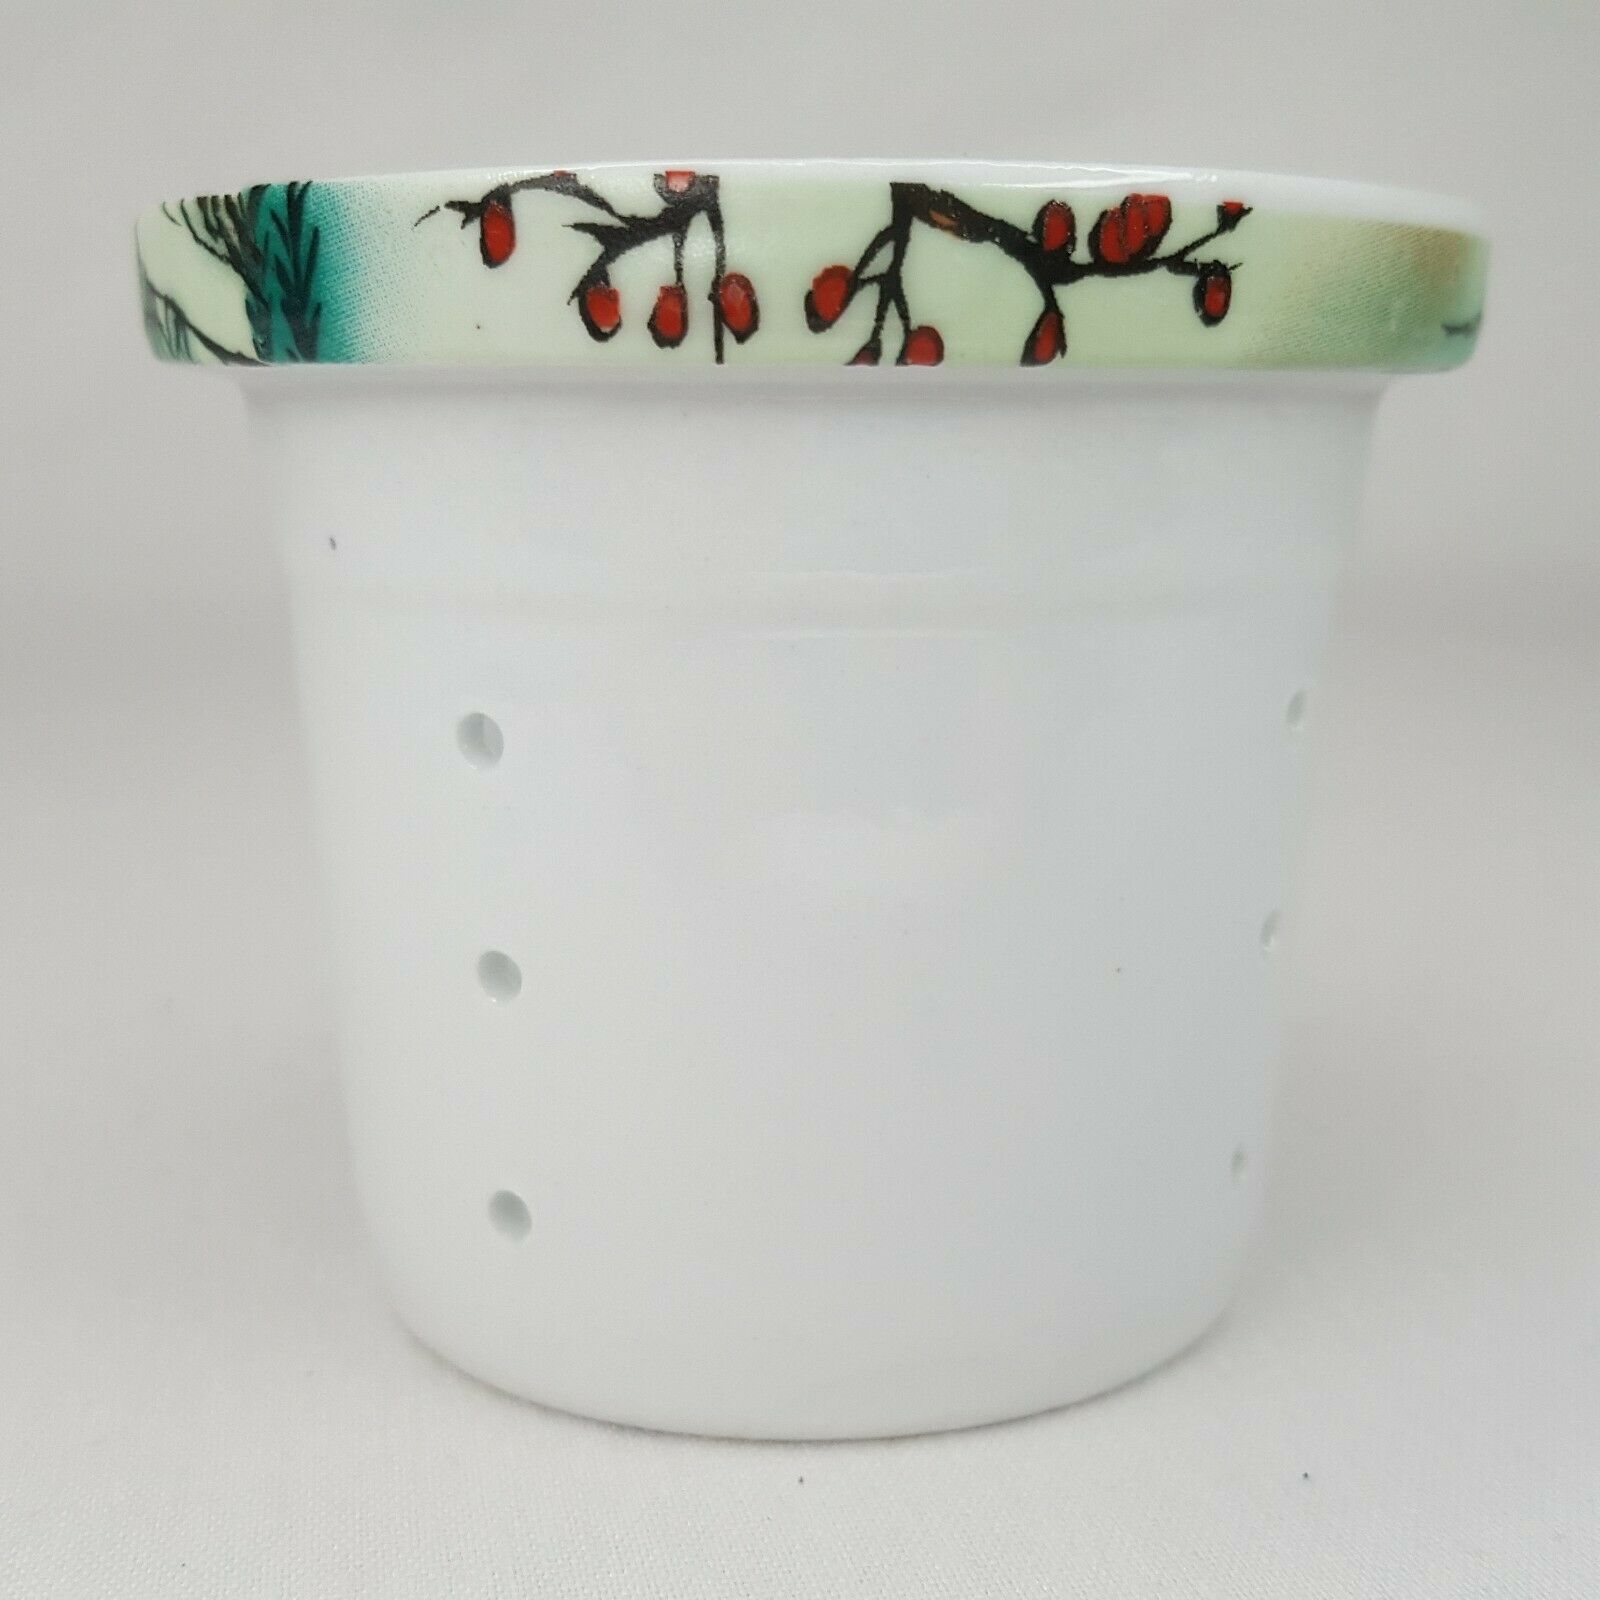 Ceramic Tea Strainer Basic White With Cherry Blossoms Japanese Painted Rim 2.5in